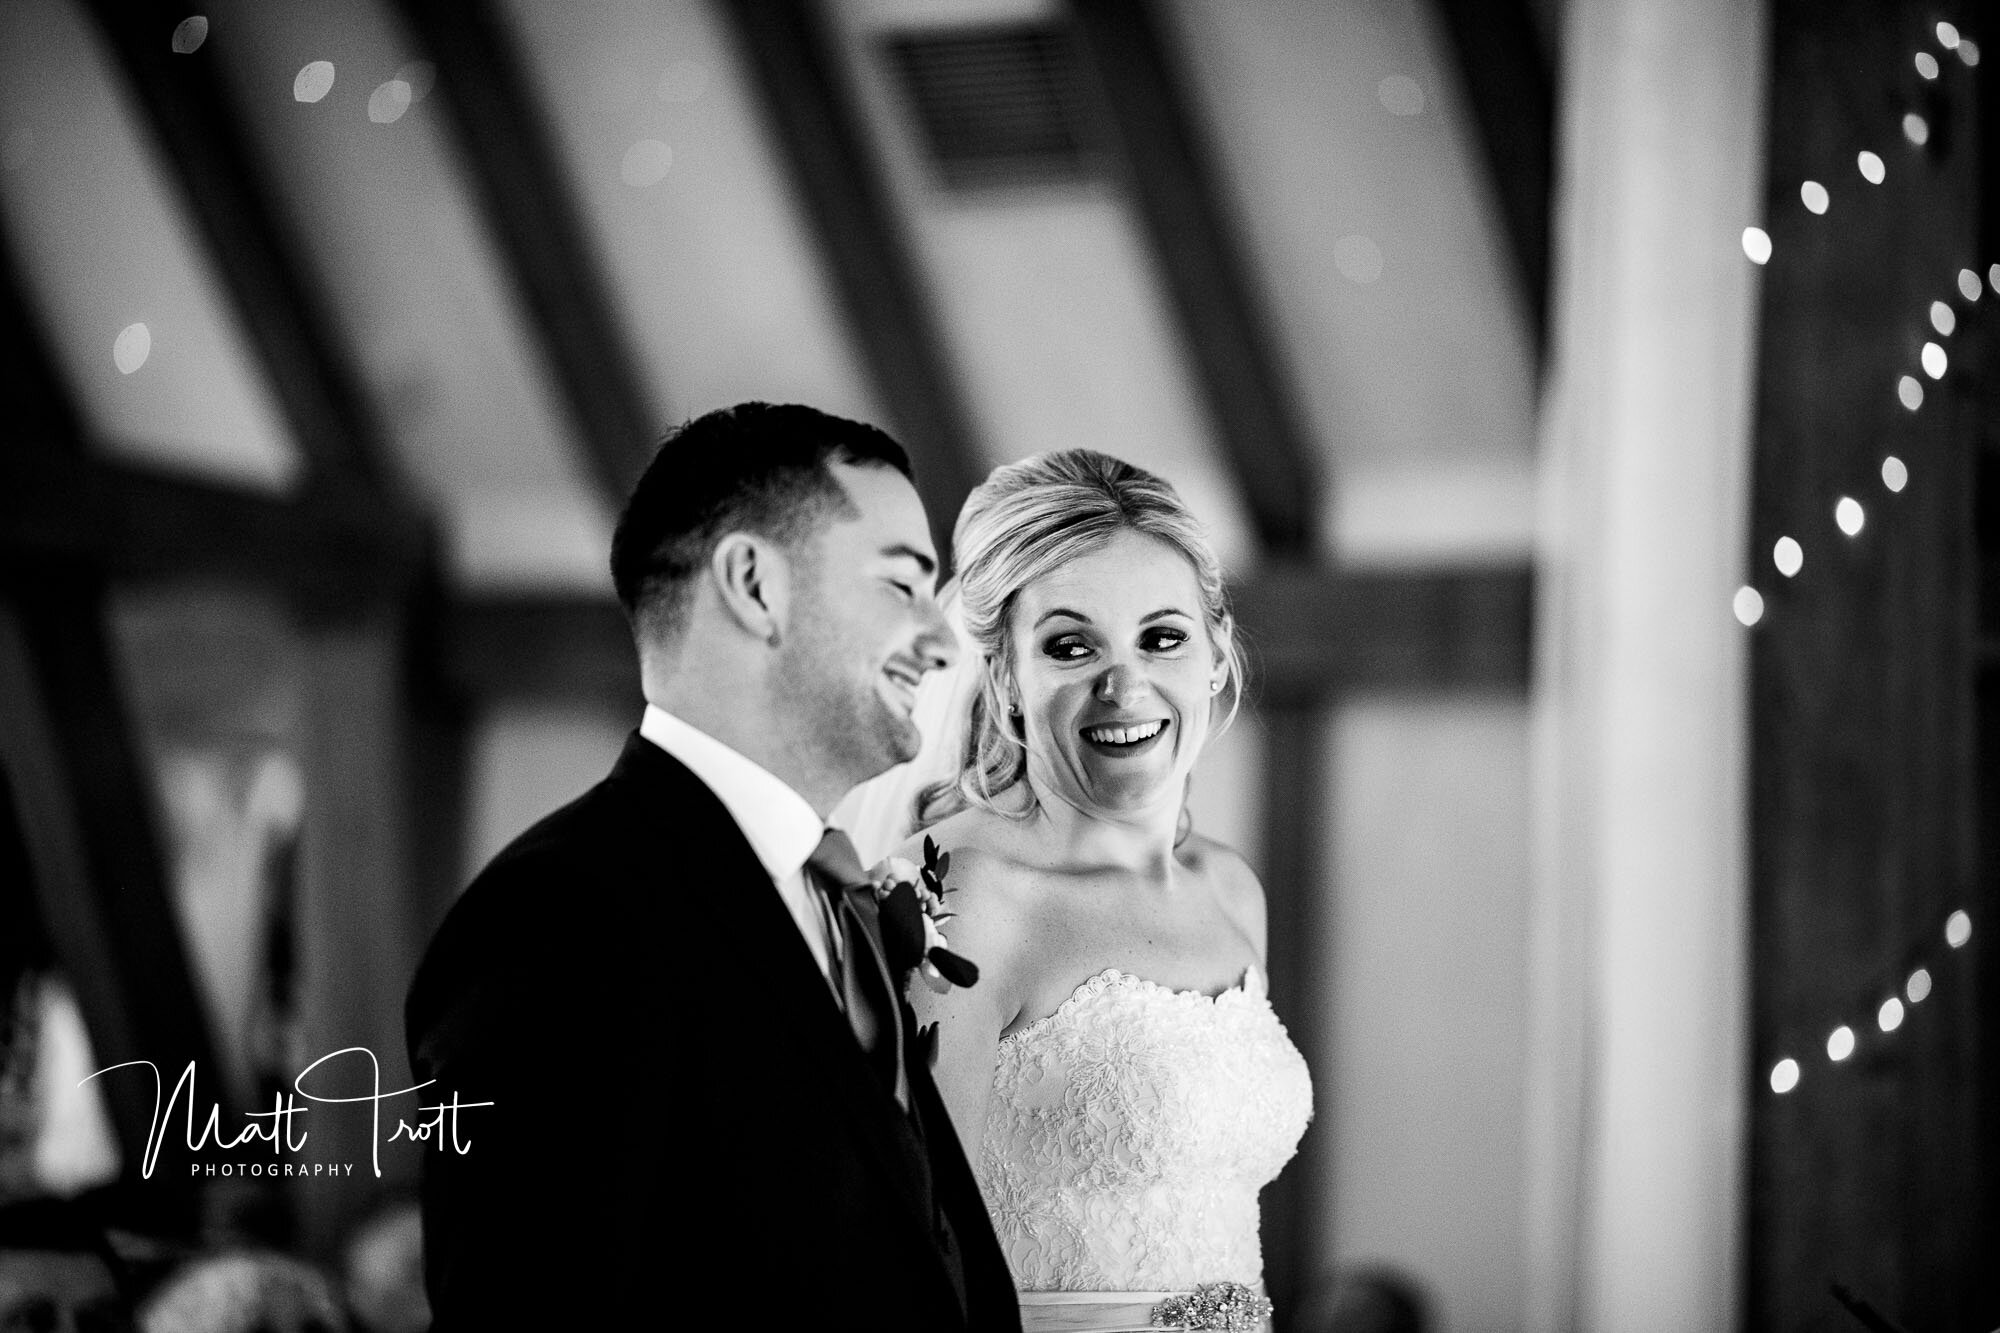 Bride smiling at the groom at their ceremony at the old kent barn